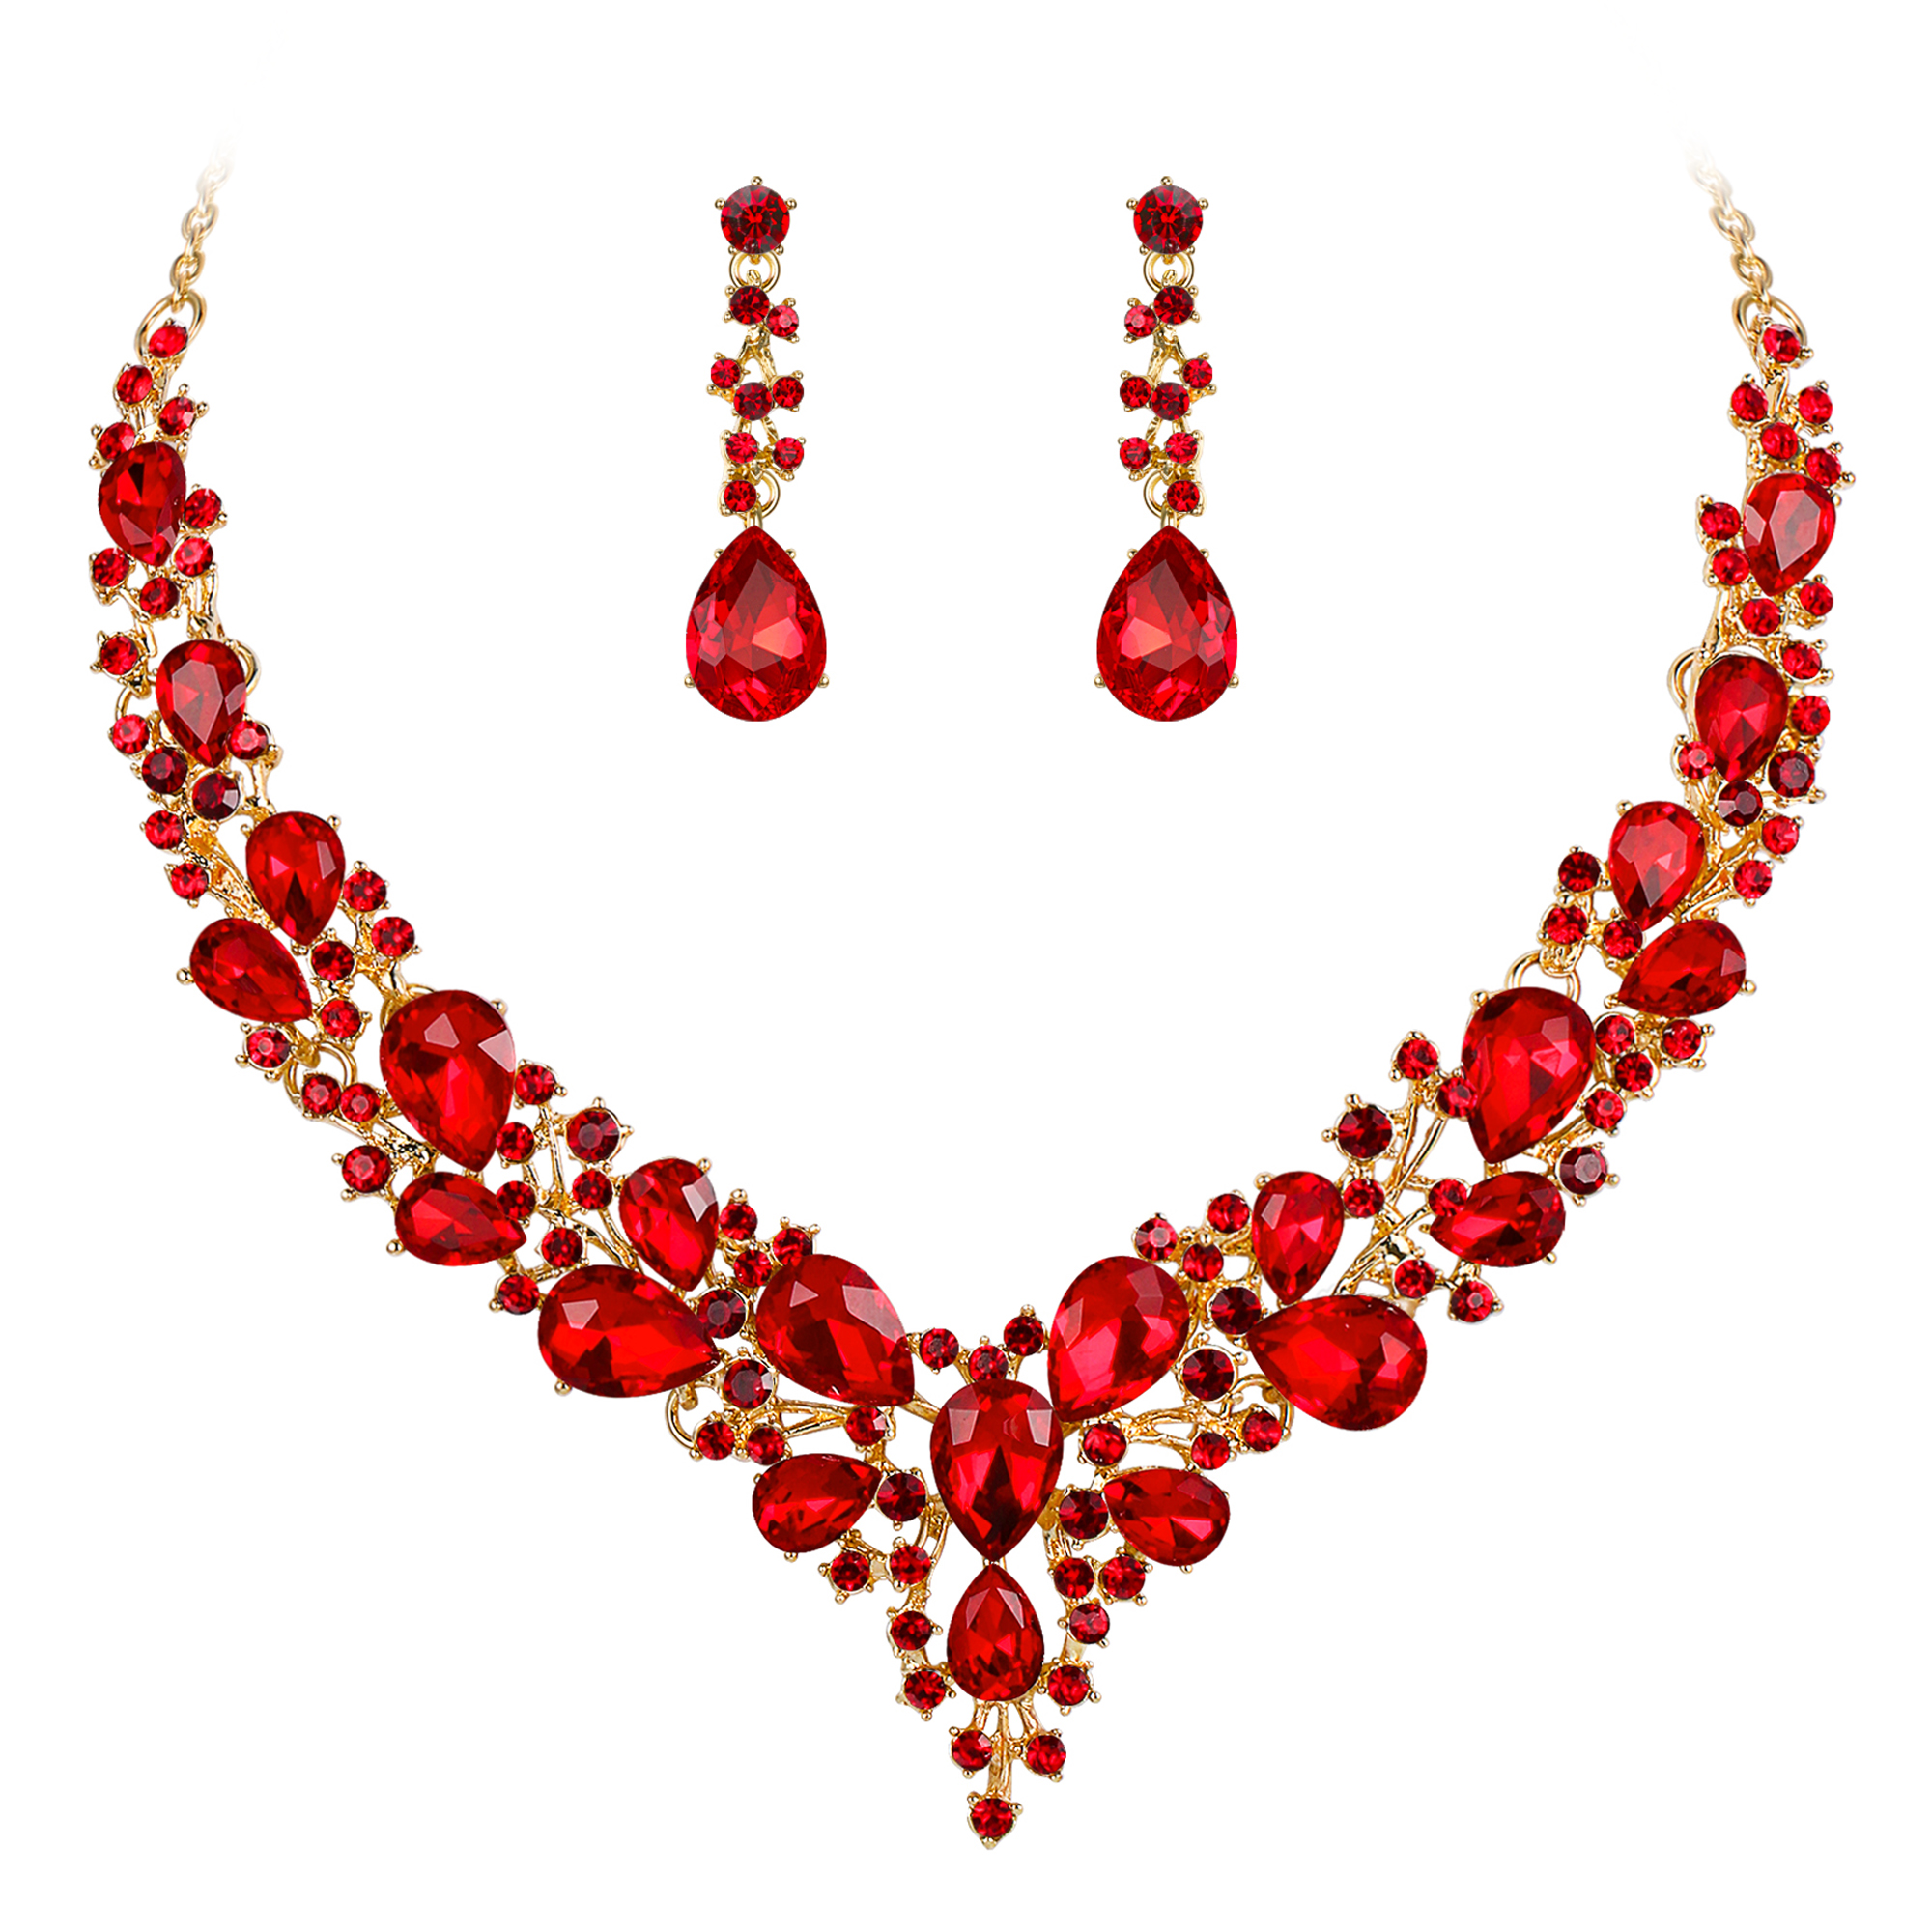 Wedure Wedding Bridal Necklace Earrings Jewelry Set for Women, Austrian Crystal Teardrop Cluster Statement Necklace Dangle Earrings Set Ruby Color Gold-Tone - image 5 of 5